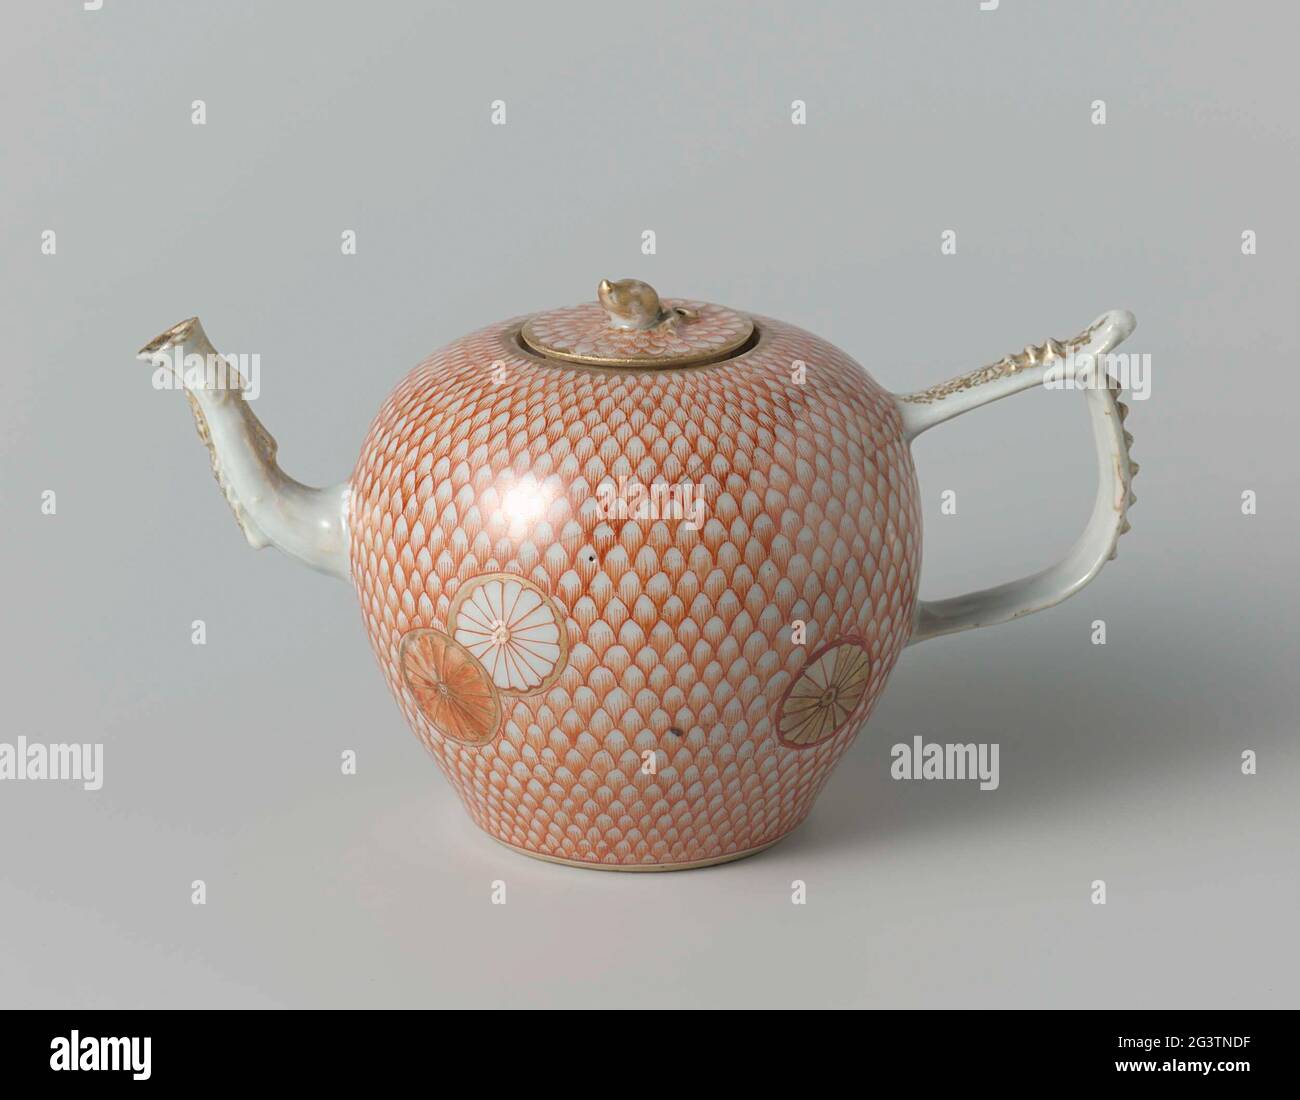 Ovoid Teapot With Stylized Flowers on a Feather or Scale Ground and Scrolls. Egg-shaped teapot of porcelain with curved spout and j-shaped ear, painted on the glaze in red and gold. On the abdomen six stylized flowers against a background of a spring or schub motif; Ranked on the ear and the spout. Lid with the same decoration. Part of a tea service. European forms with email colors. Stock Photo